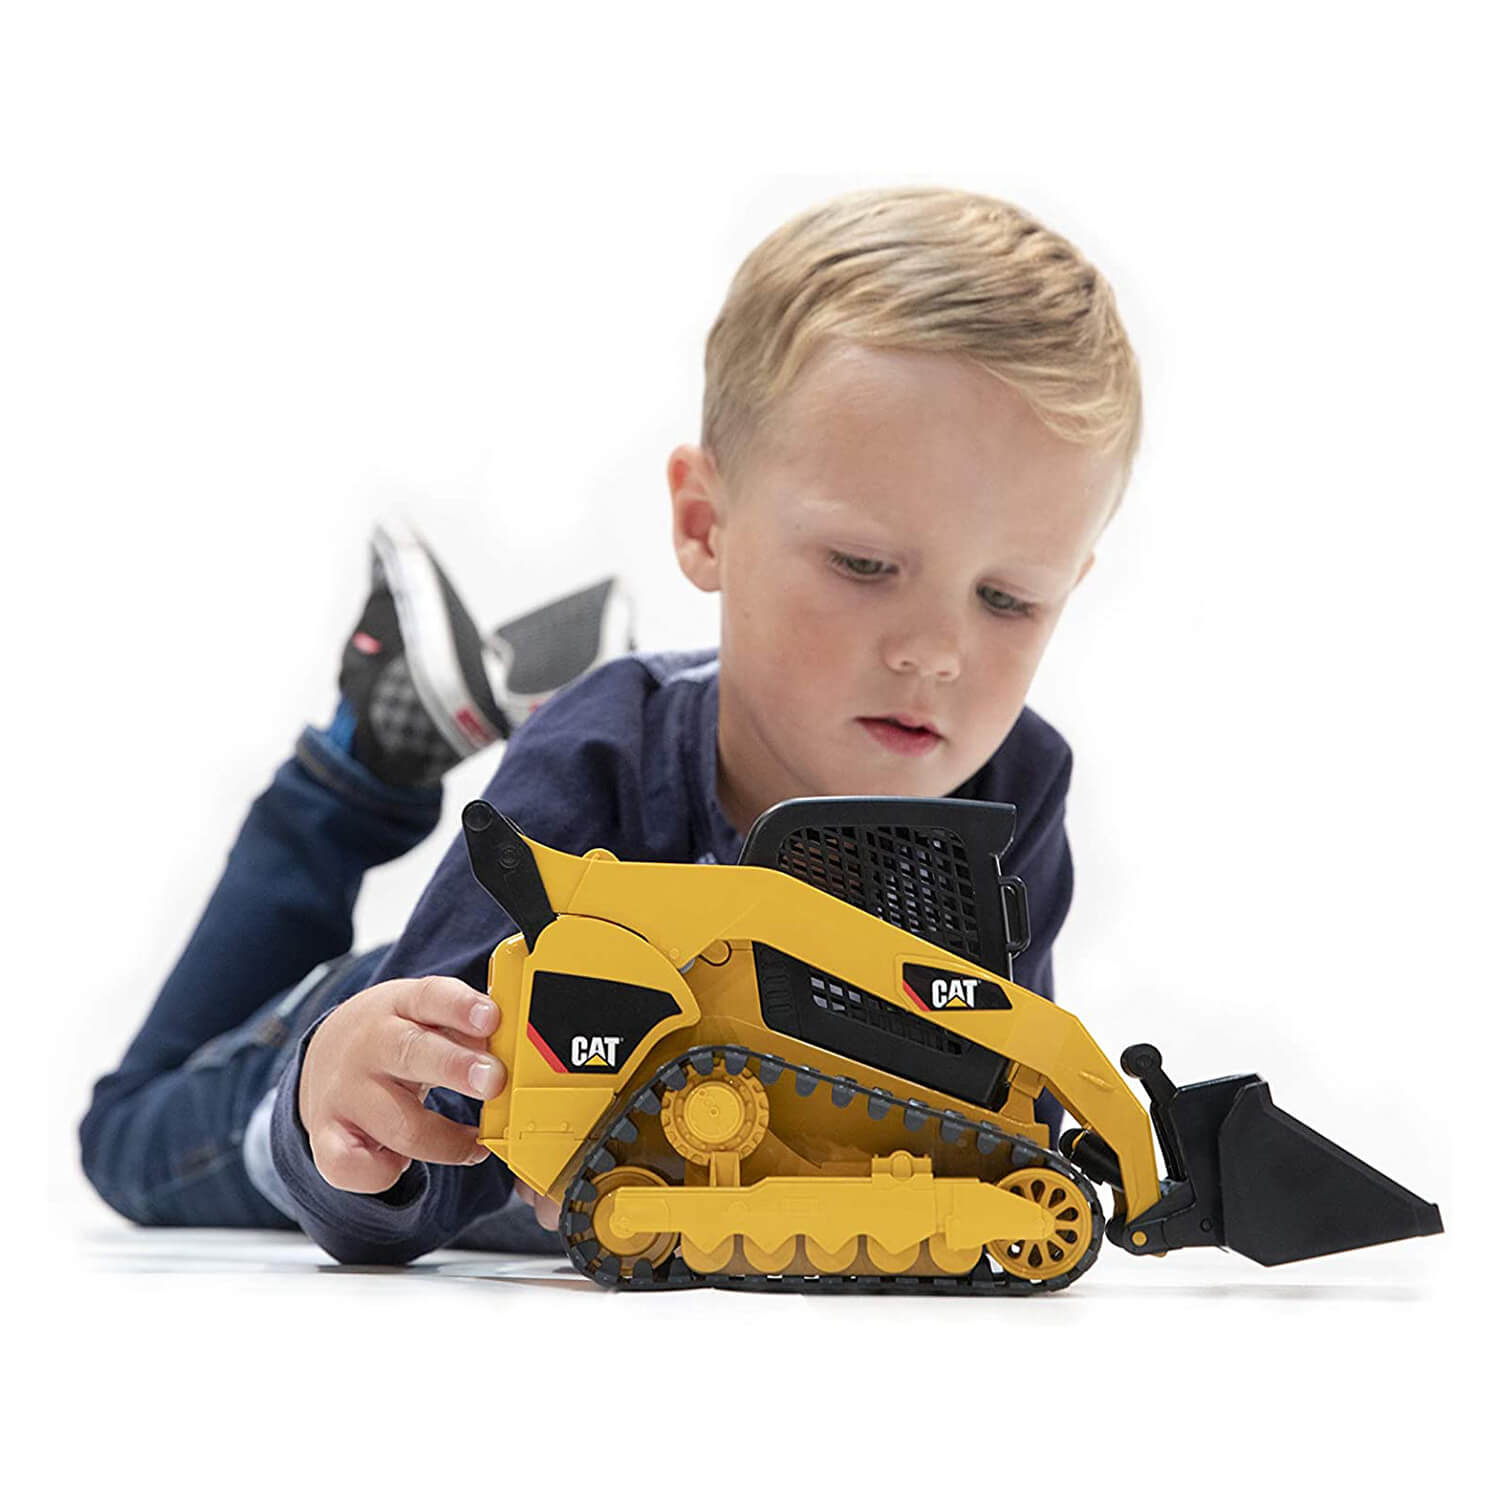 Kid playing with the caterpillar vehicle.